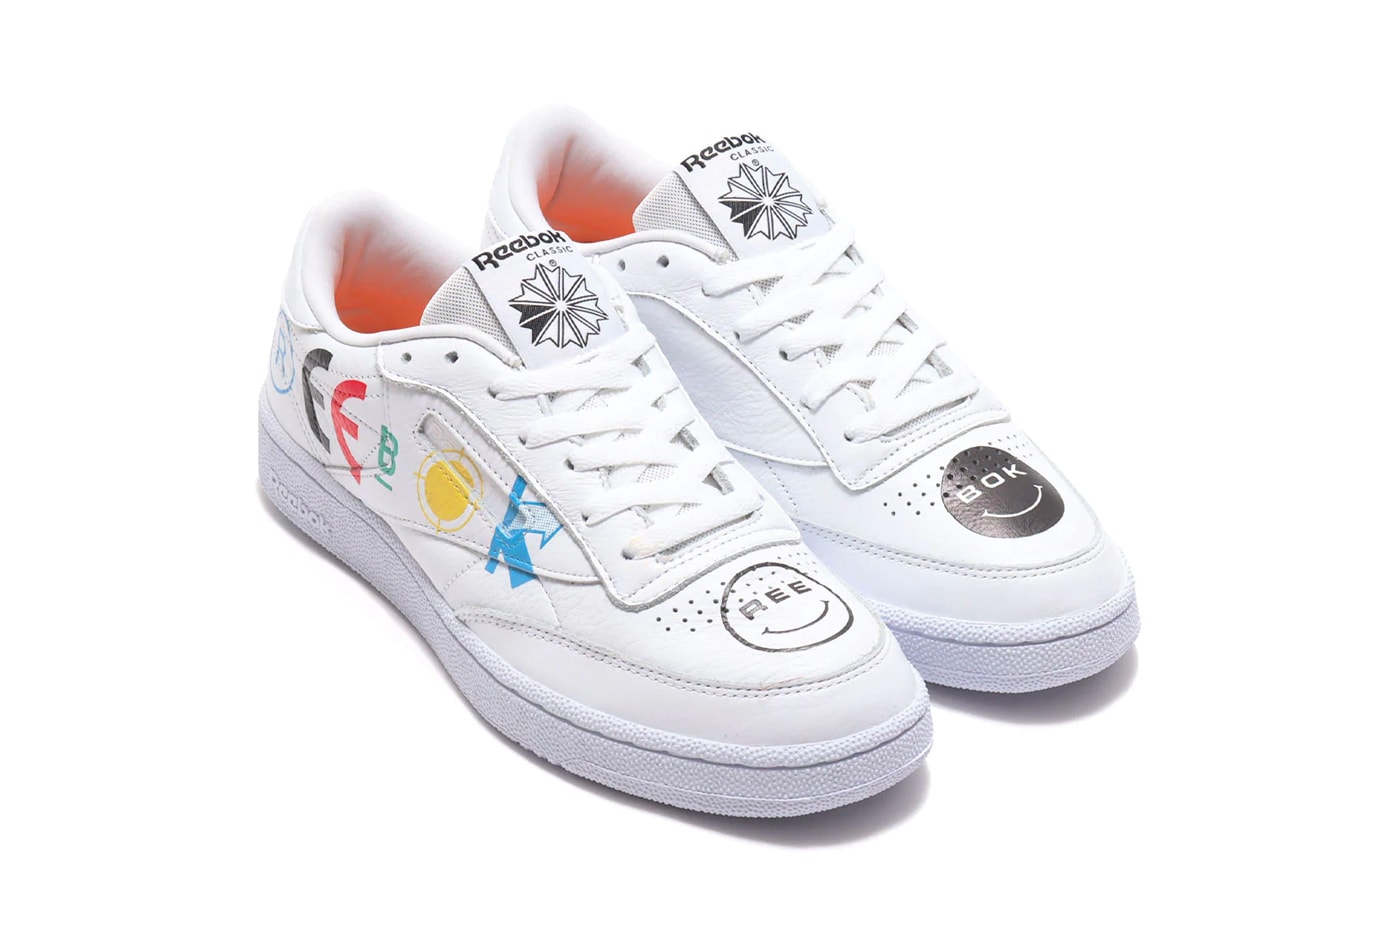 BlackEyePatch Reebok Club C 85 menswear streetwear sneakers shoes kicks trainers runners spring summer 2020 collection collaborations ss20